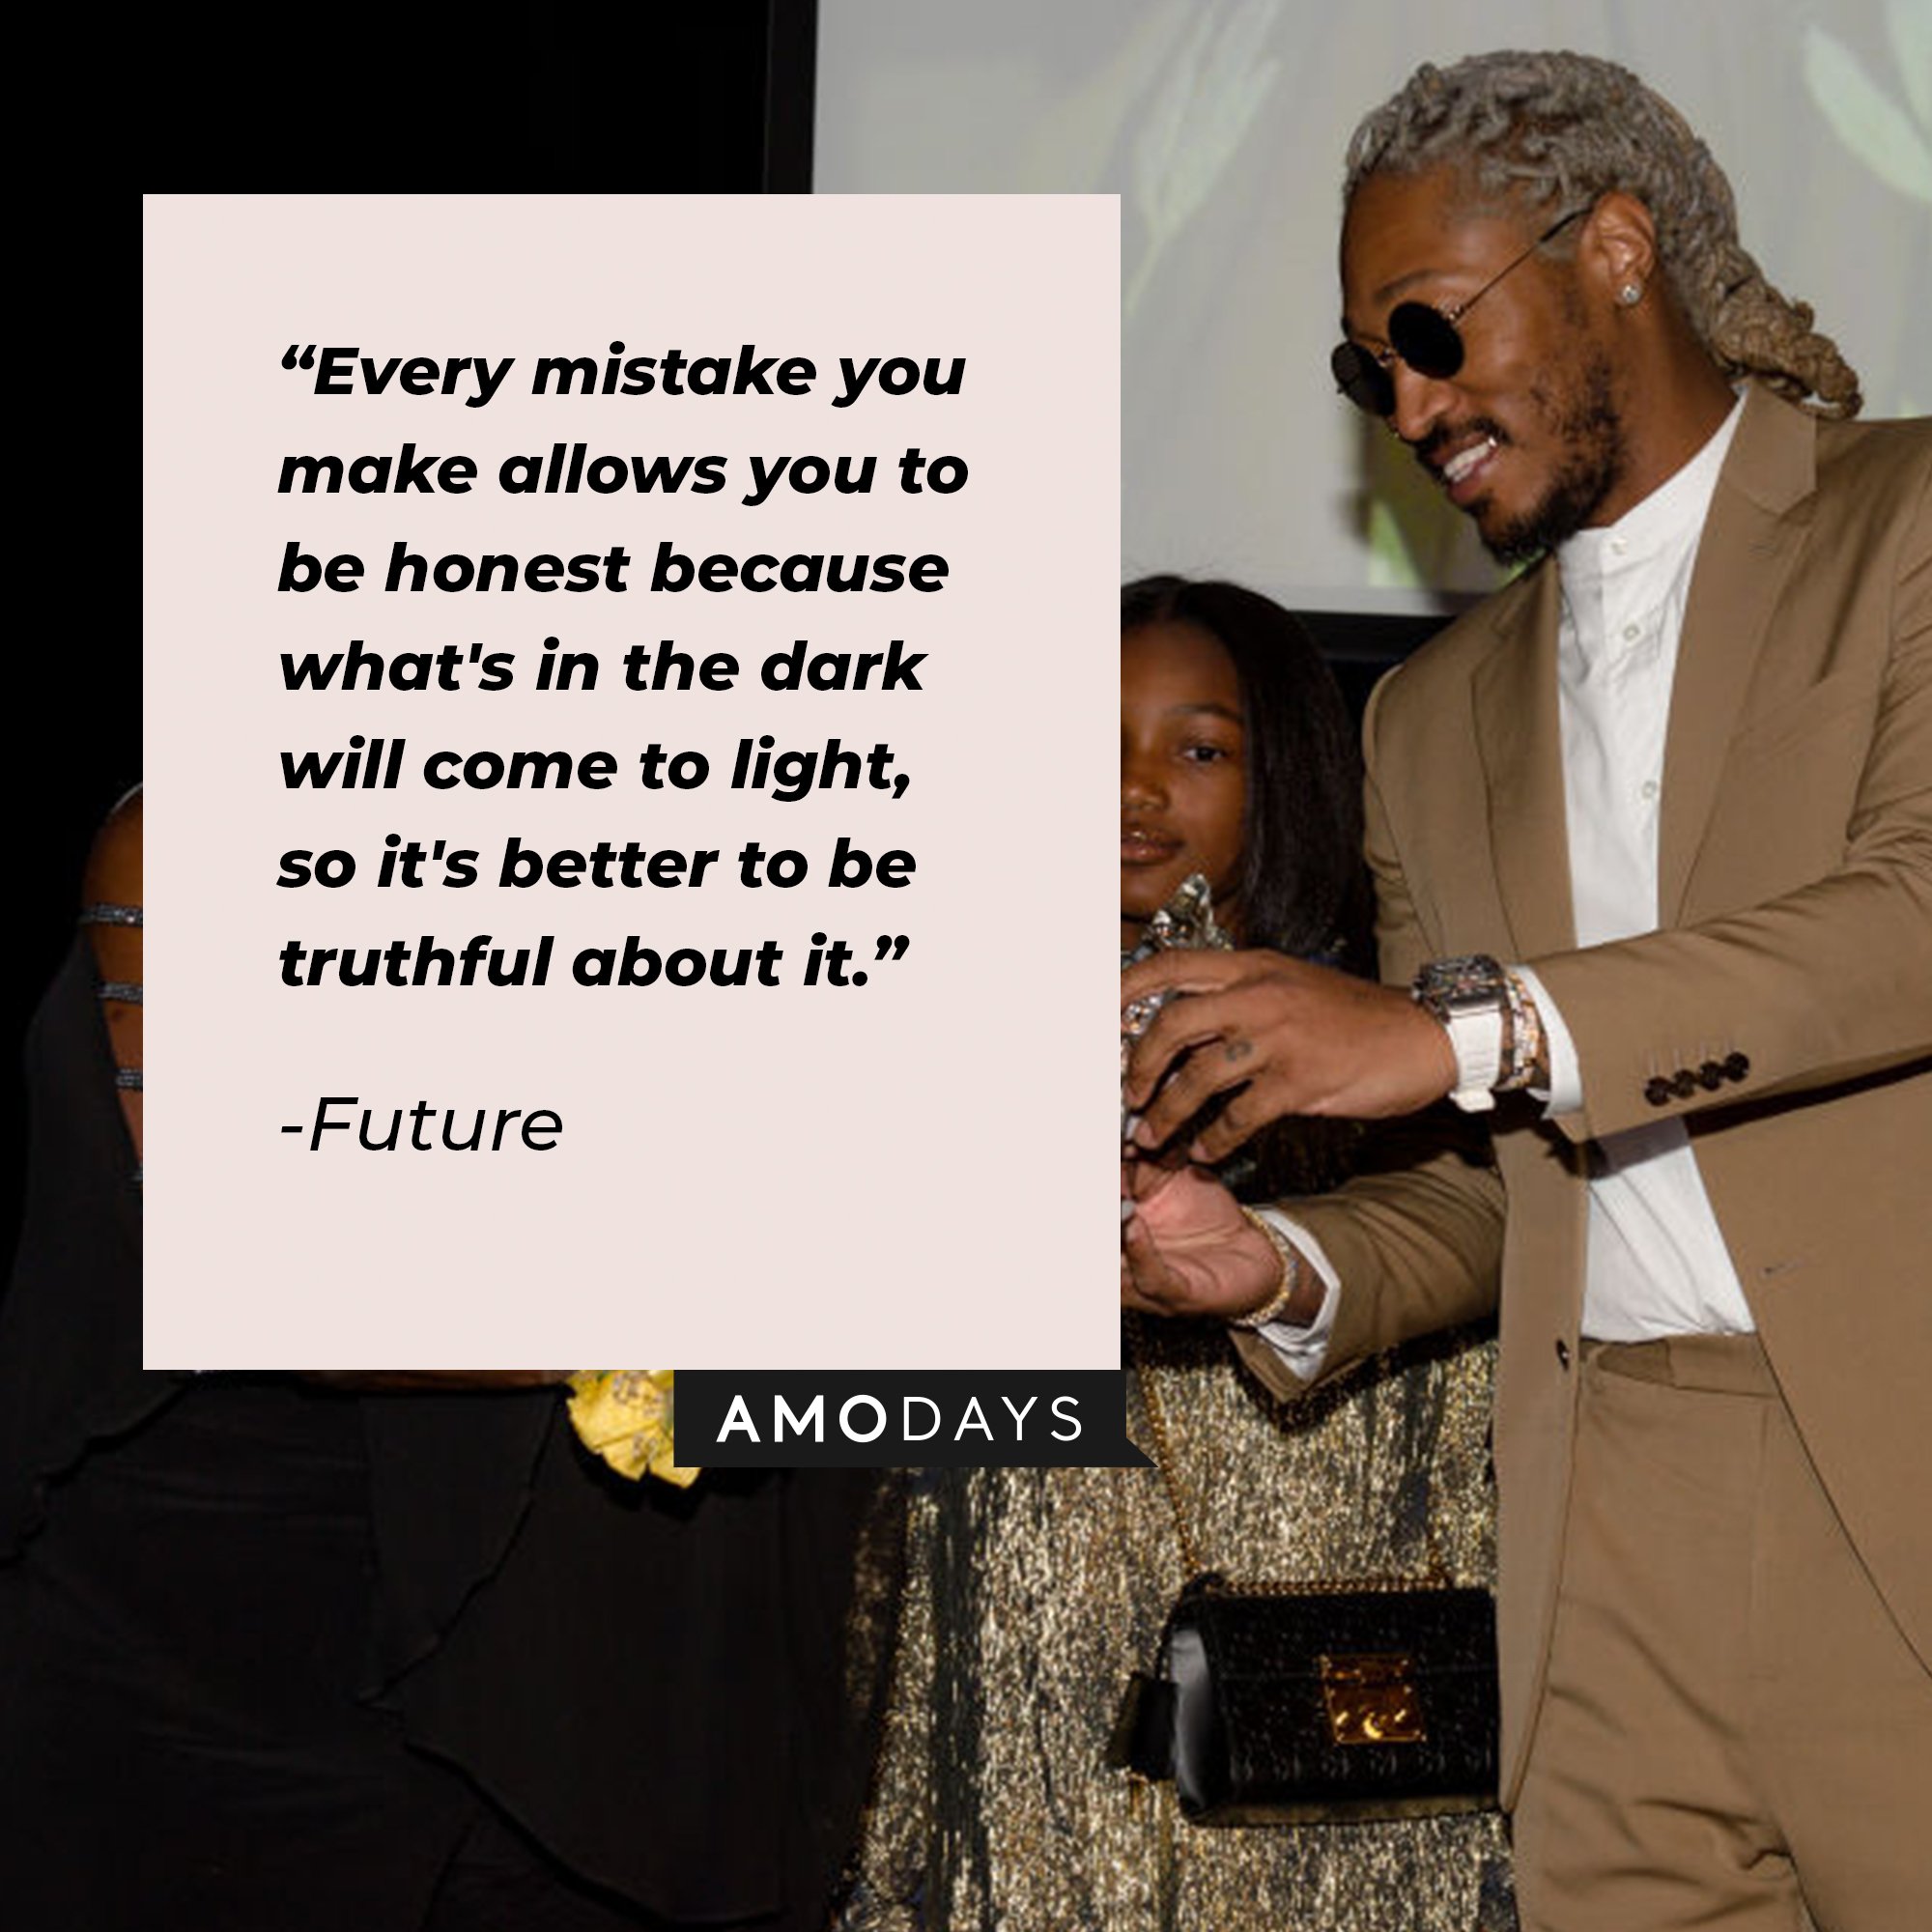 Future’s quote: "Every mistake you make allows you to be honest because what's in the dark will come to light, so it's better to be truthful about it." | Image: AmoDays 